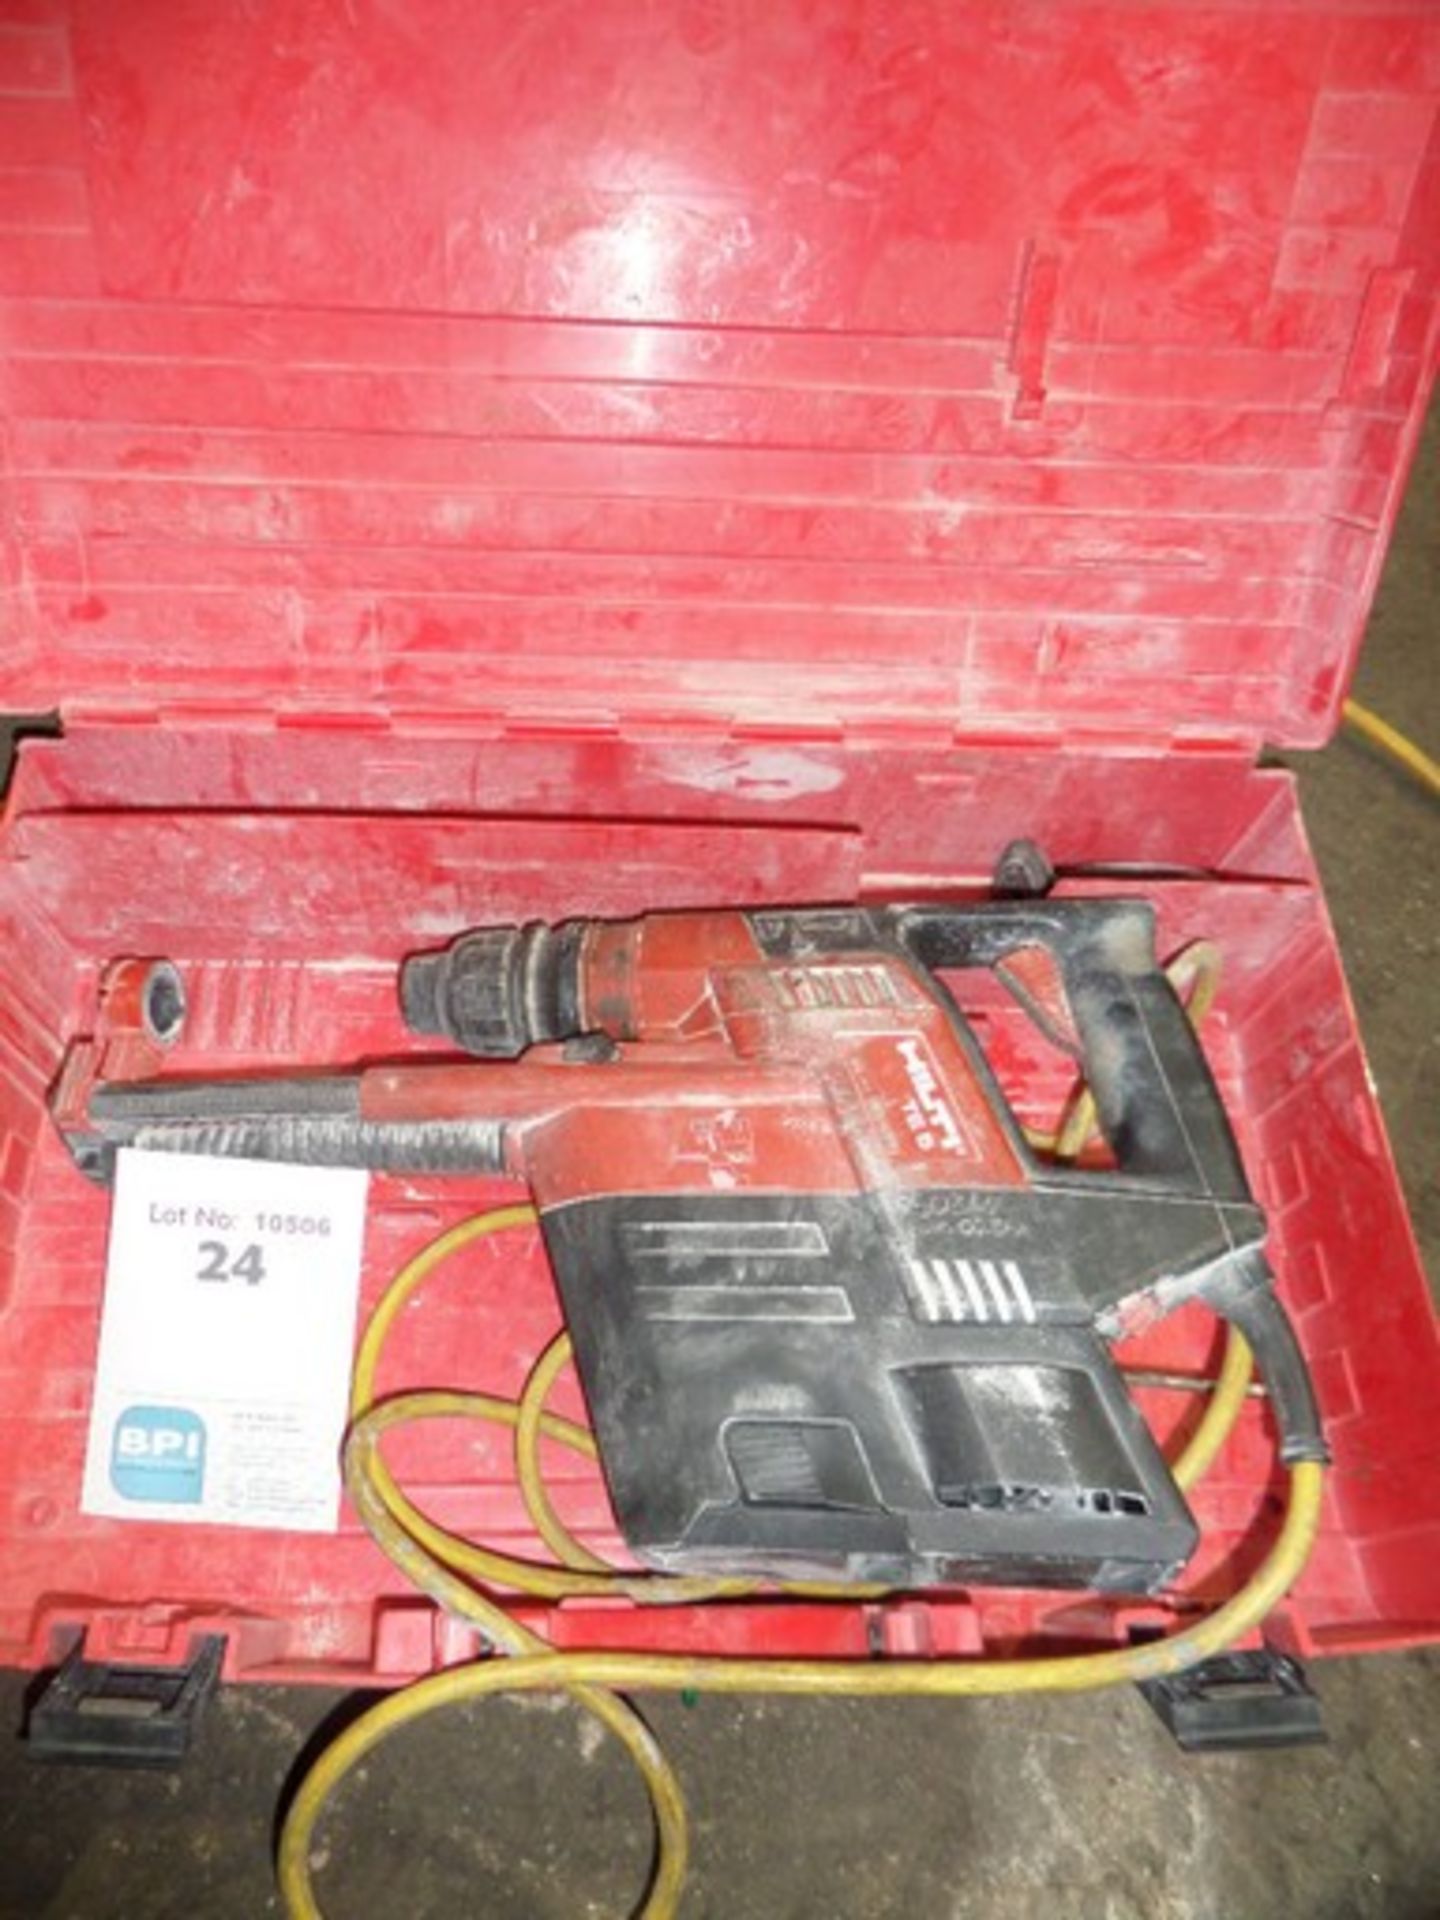 Hilti TE 5 {015210} DUSTFREE HAMMER DRILLER TE5/6 Comes in original case and has a 110v 16amp